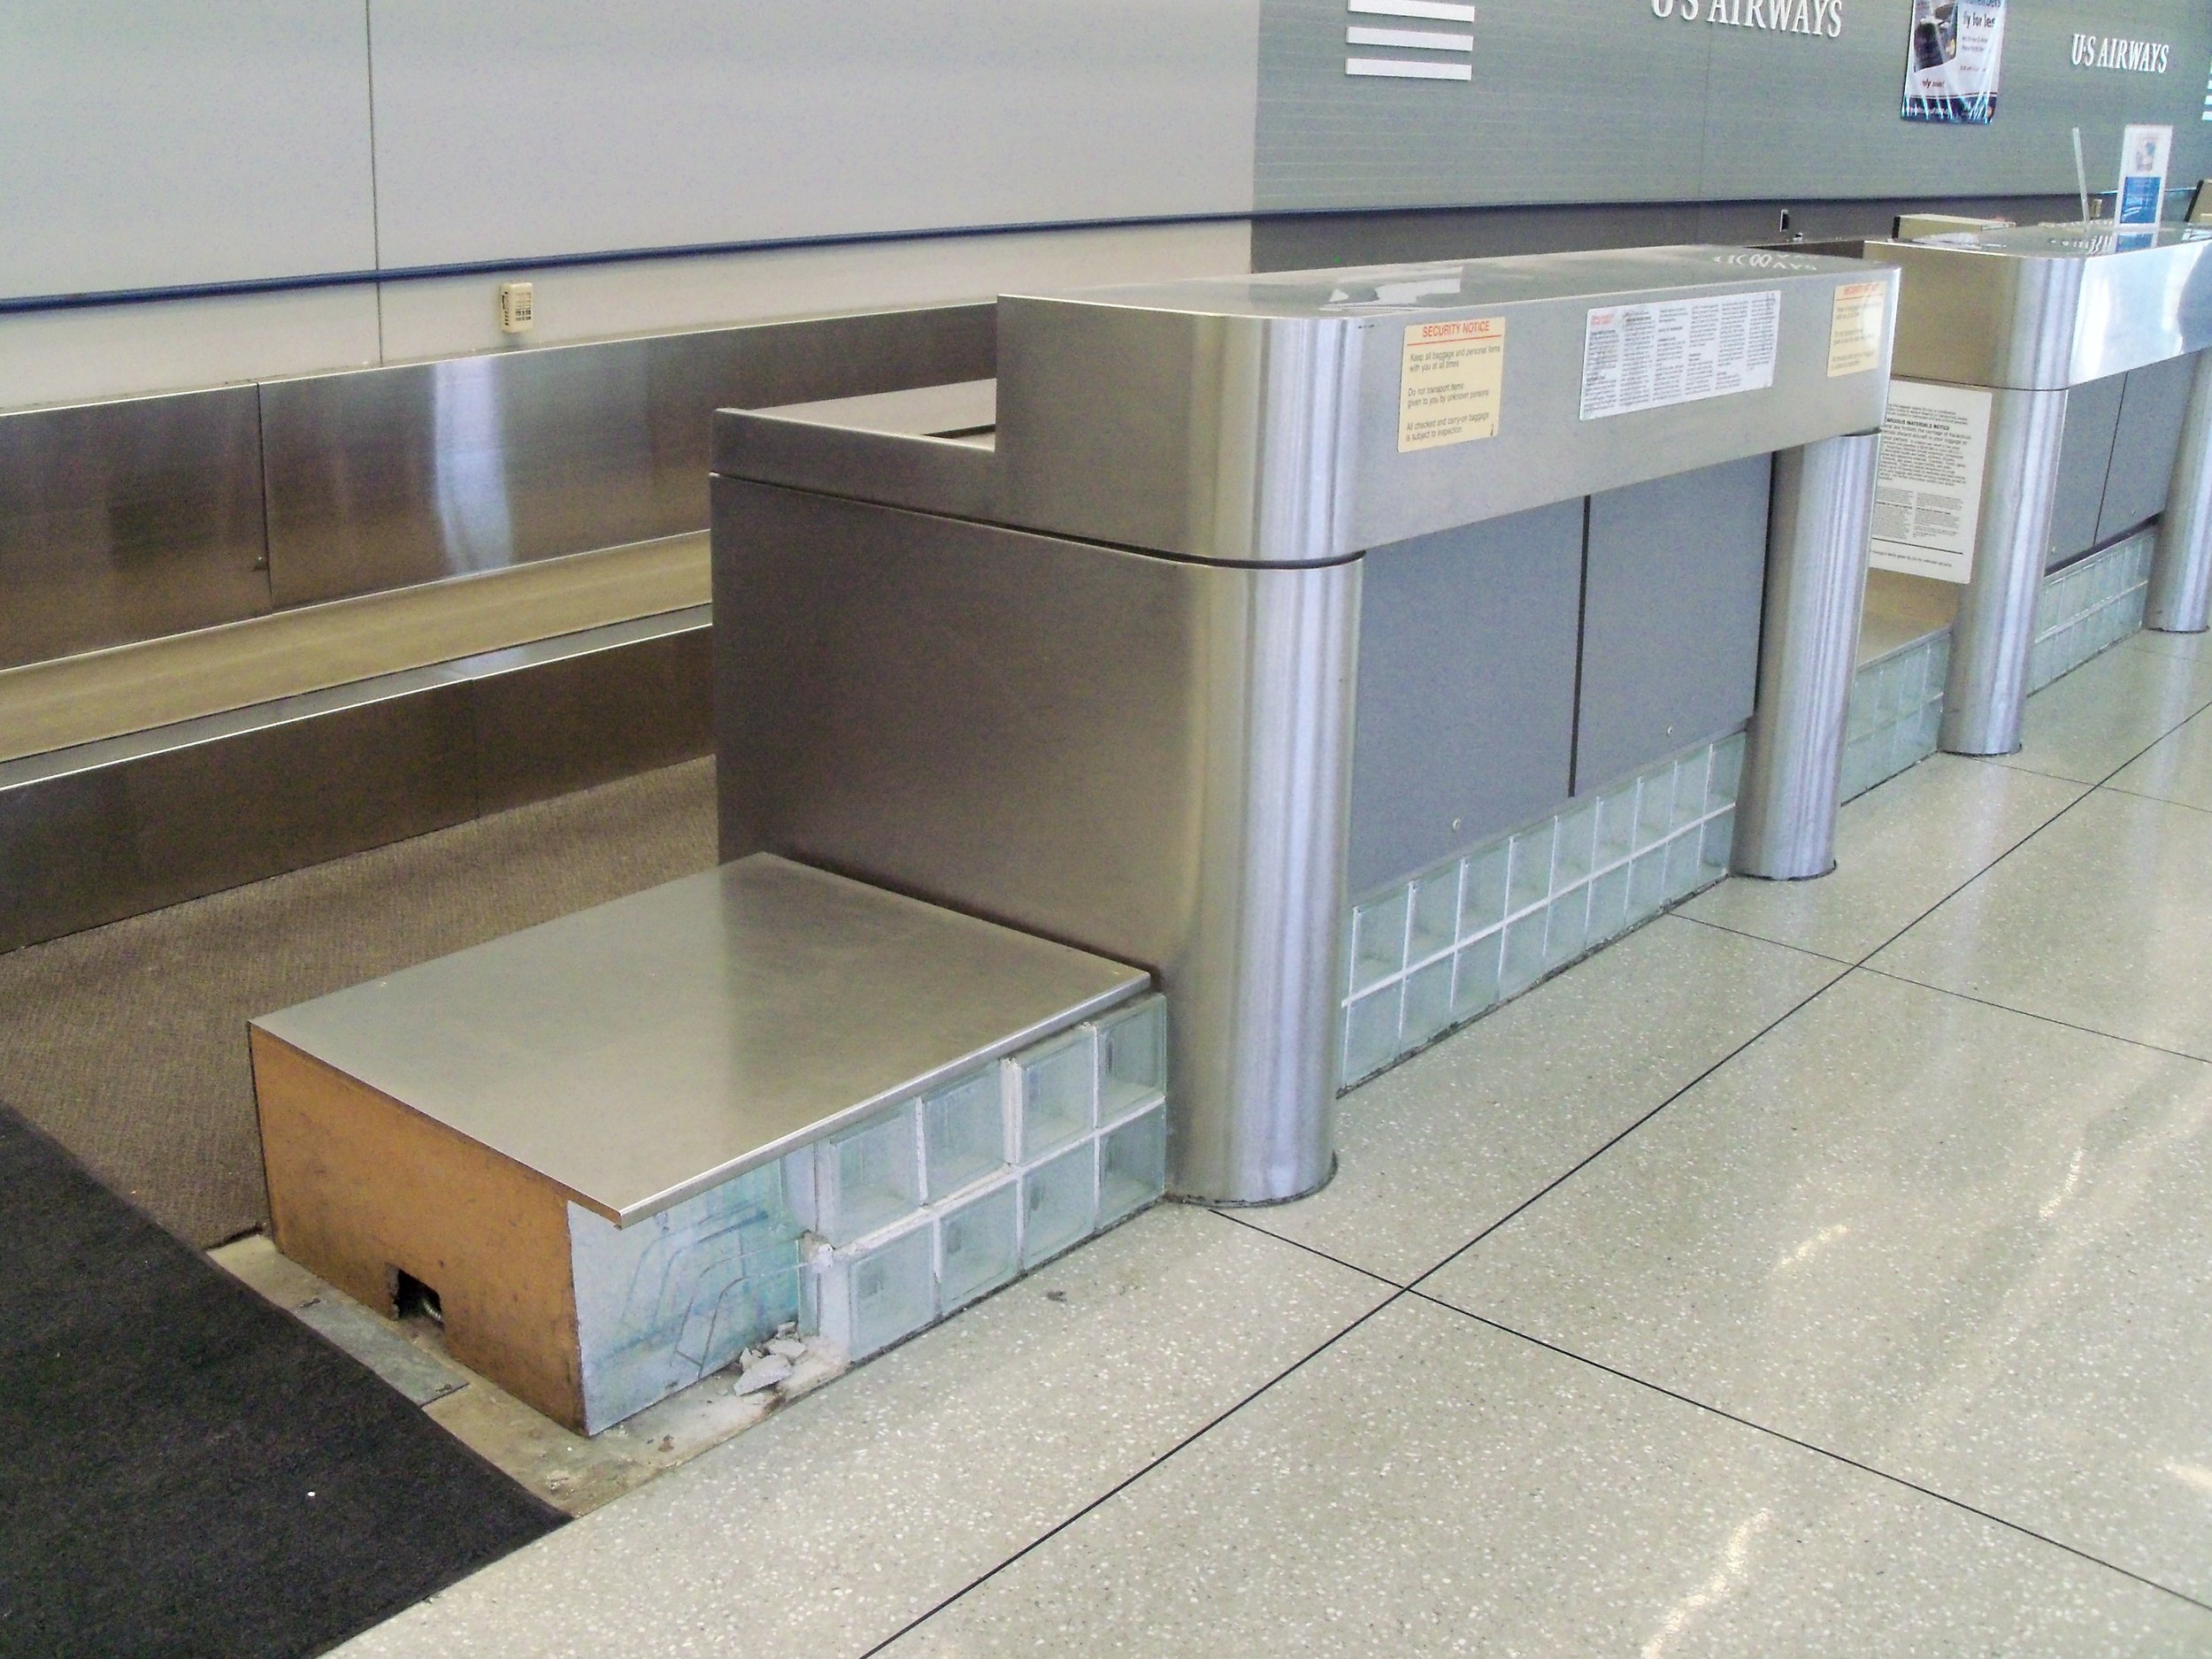 Rochester Airport Ticket Counter Renovation